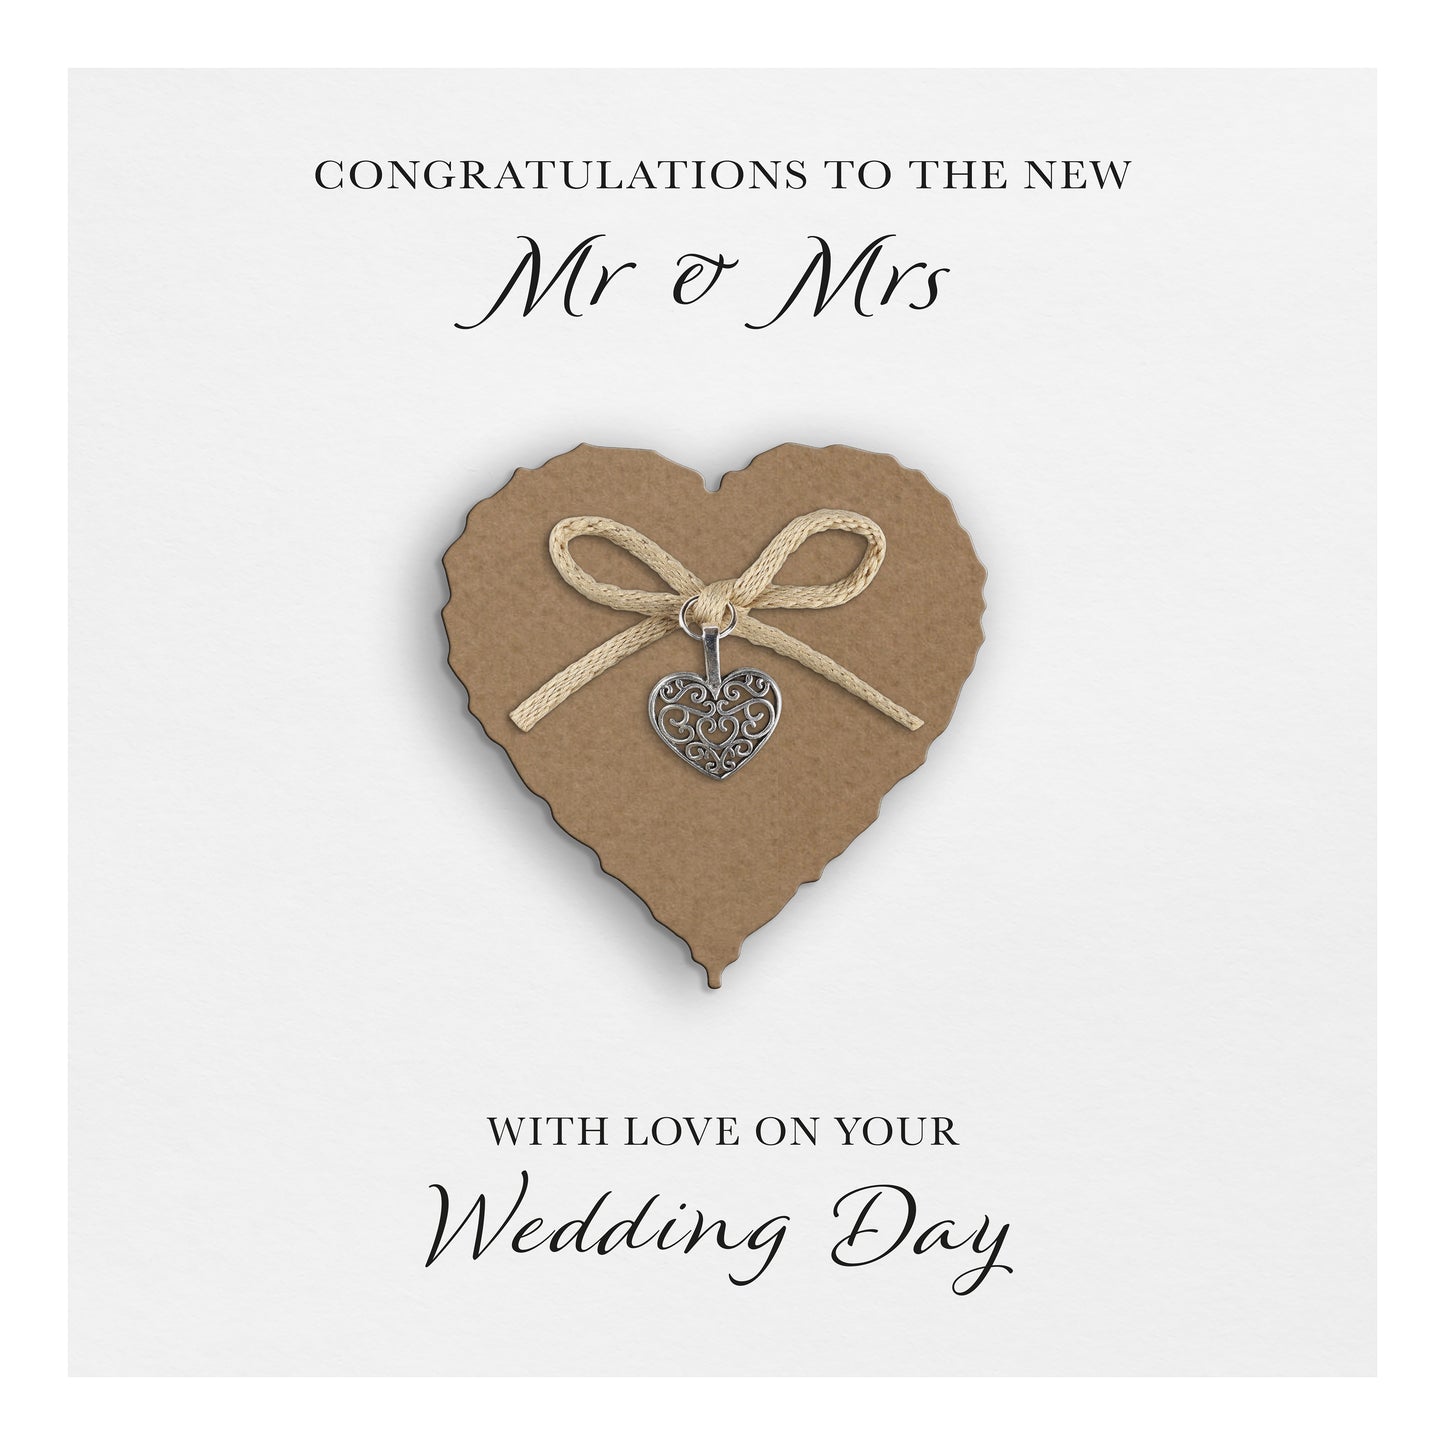 Wedding Day Card "Heart Charm & Bow" (White Cardstock)